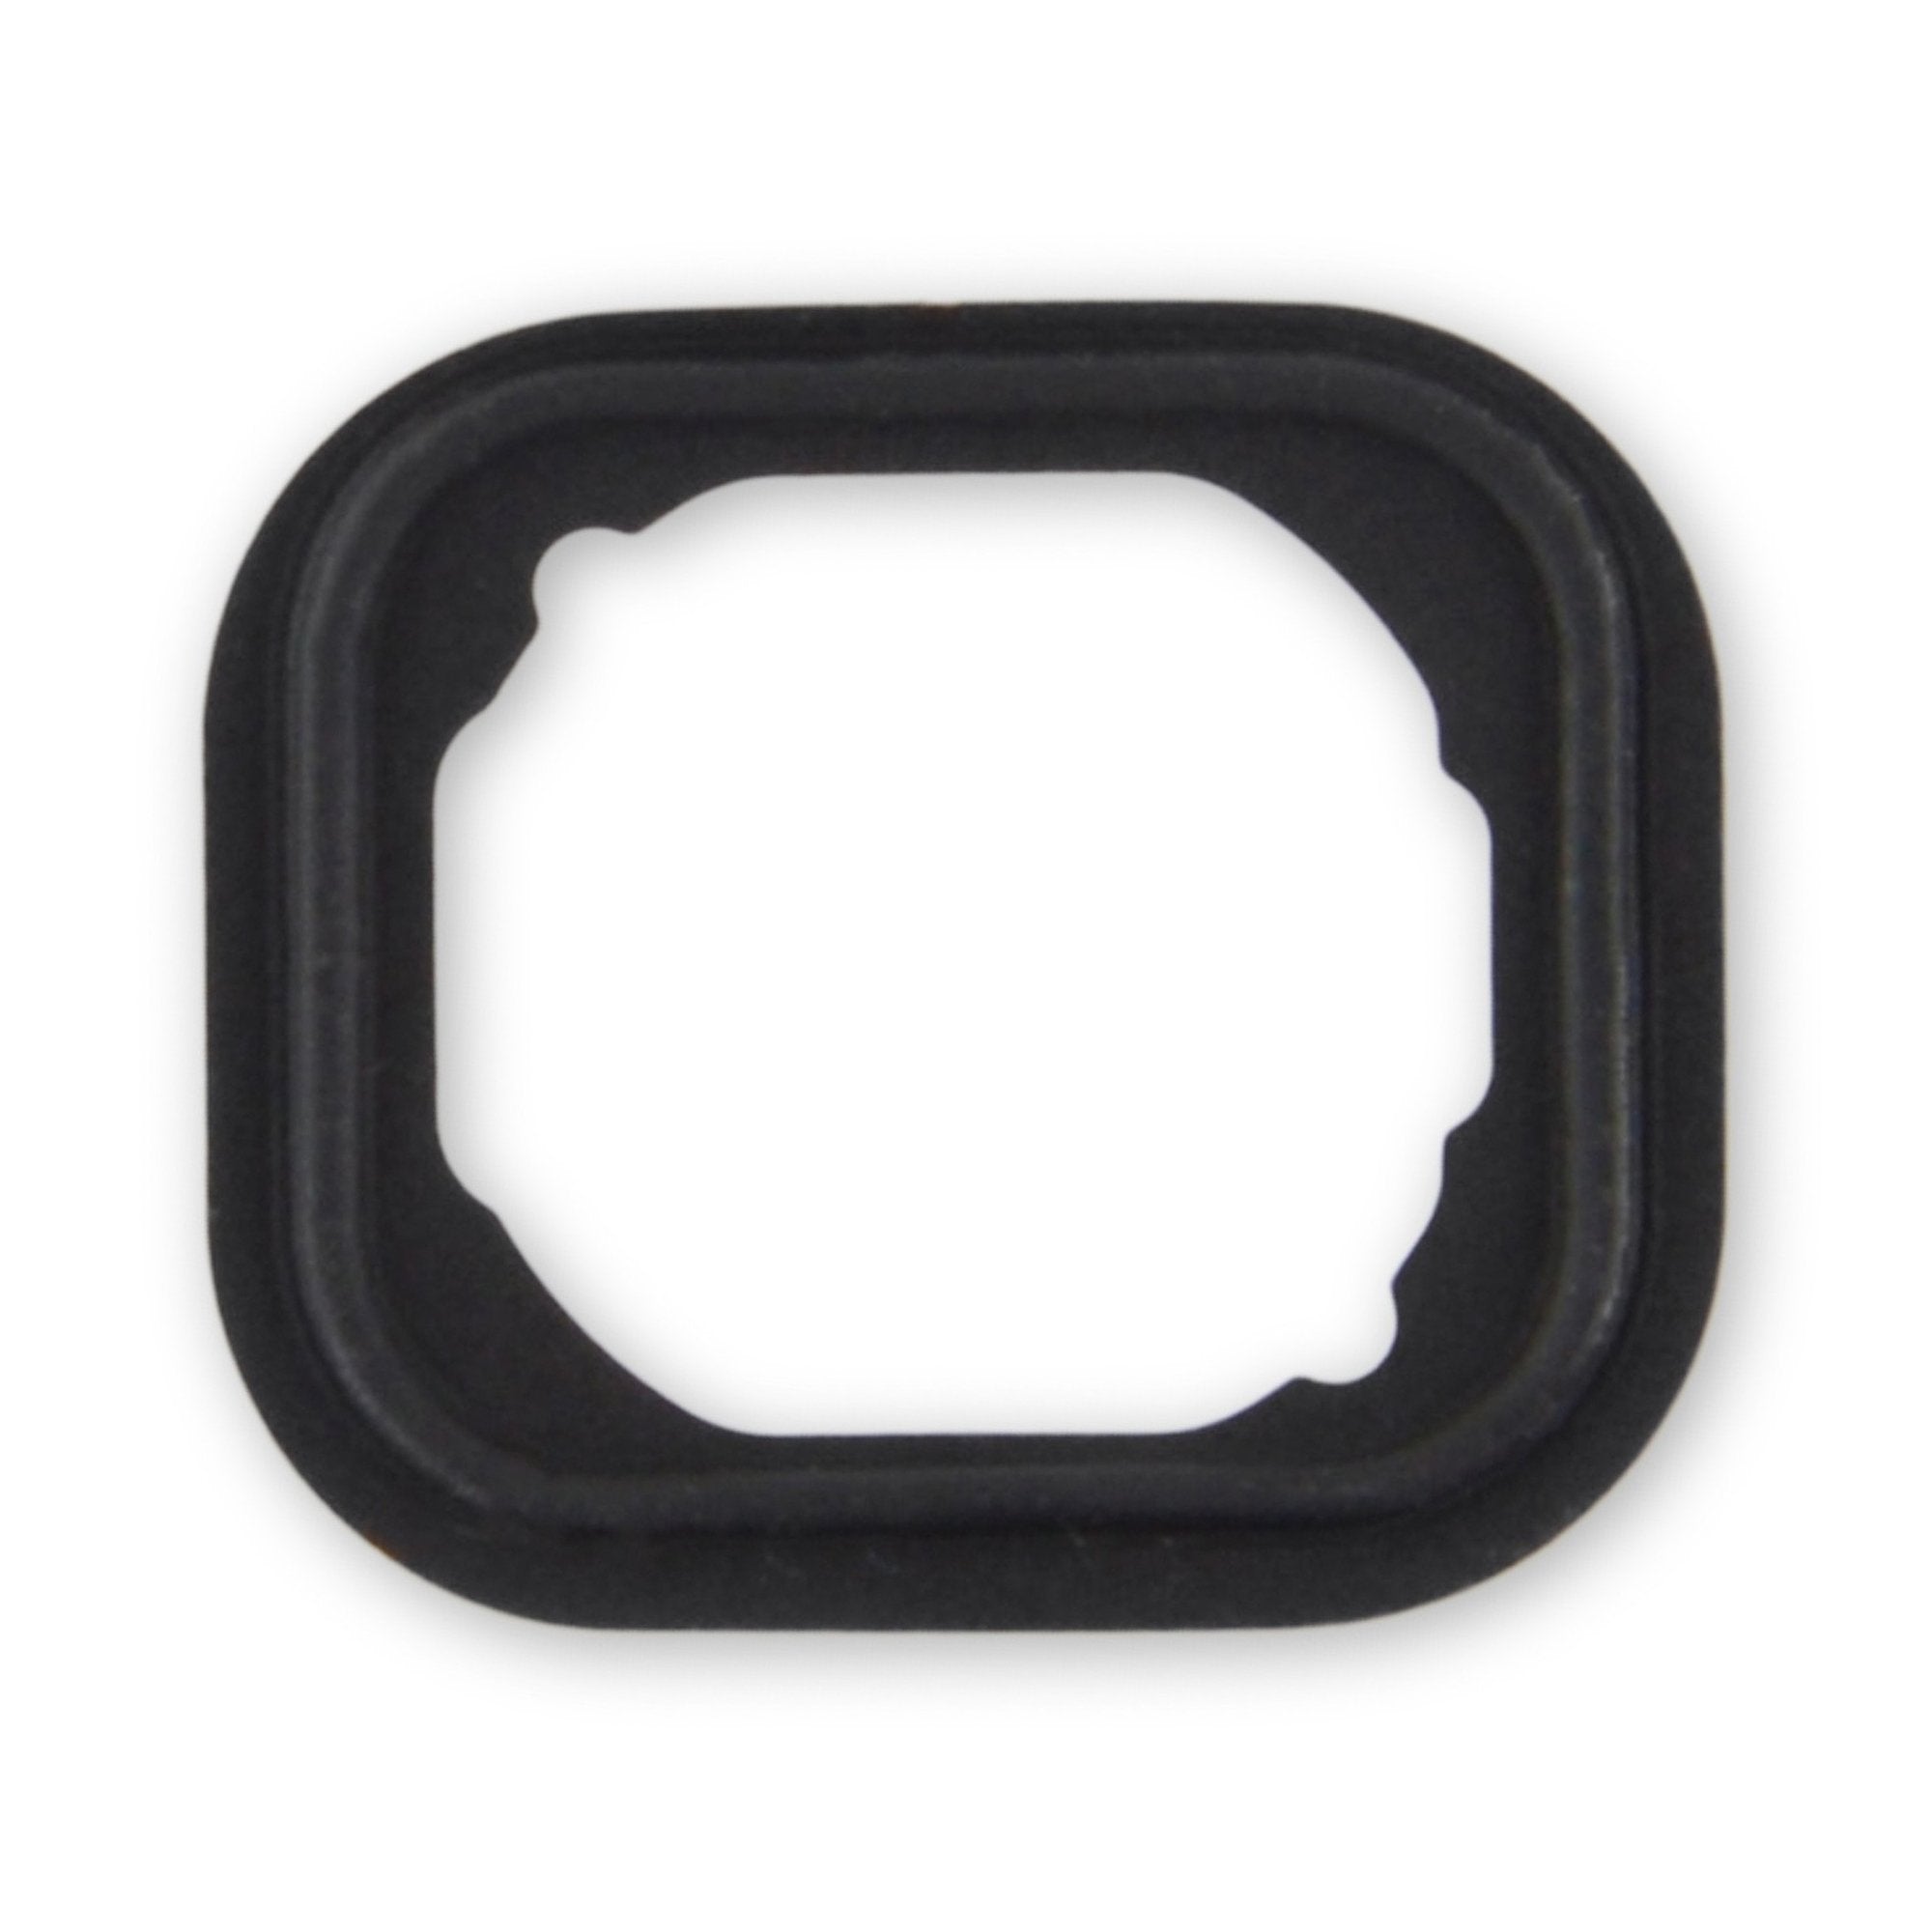 iPhone 6s and 6s Plus Home Button Gasket New